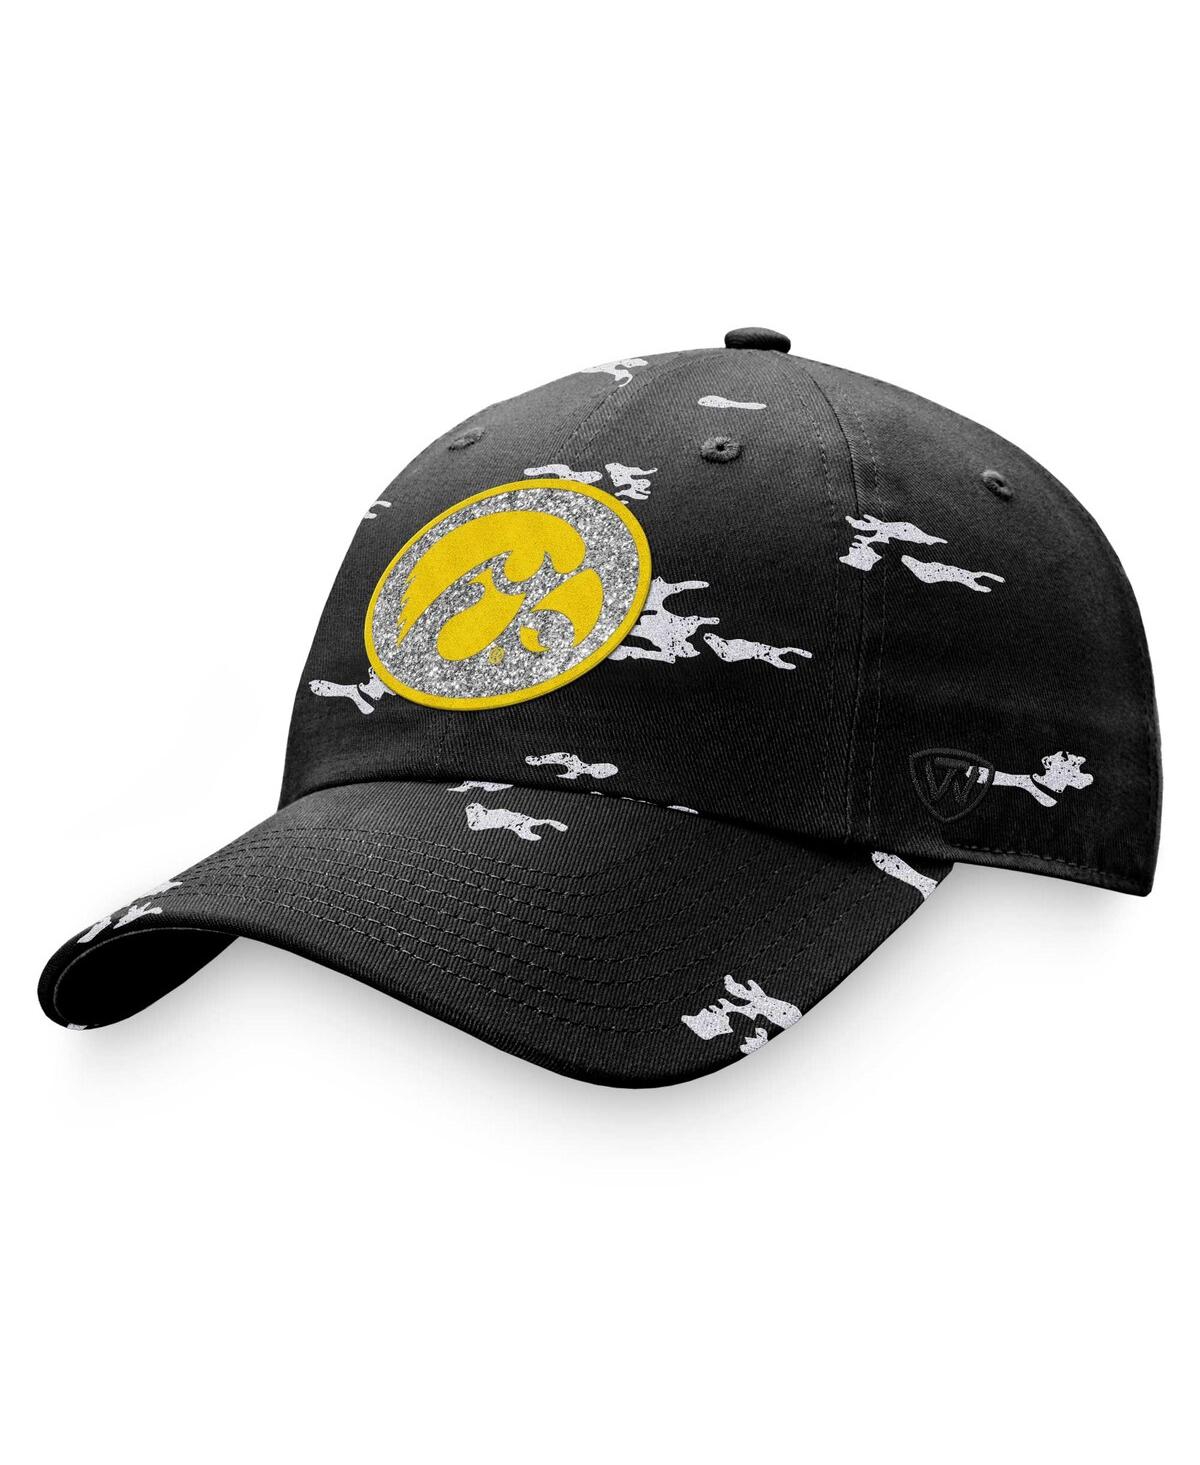 Women's Top of the World Black Iowa Hawkeyes Oht Military-Inspired Appreciation Betty Adjustable Hat - Black